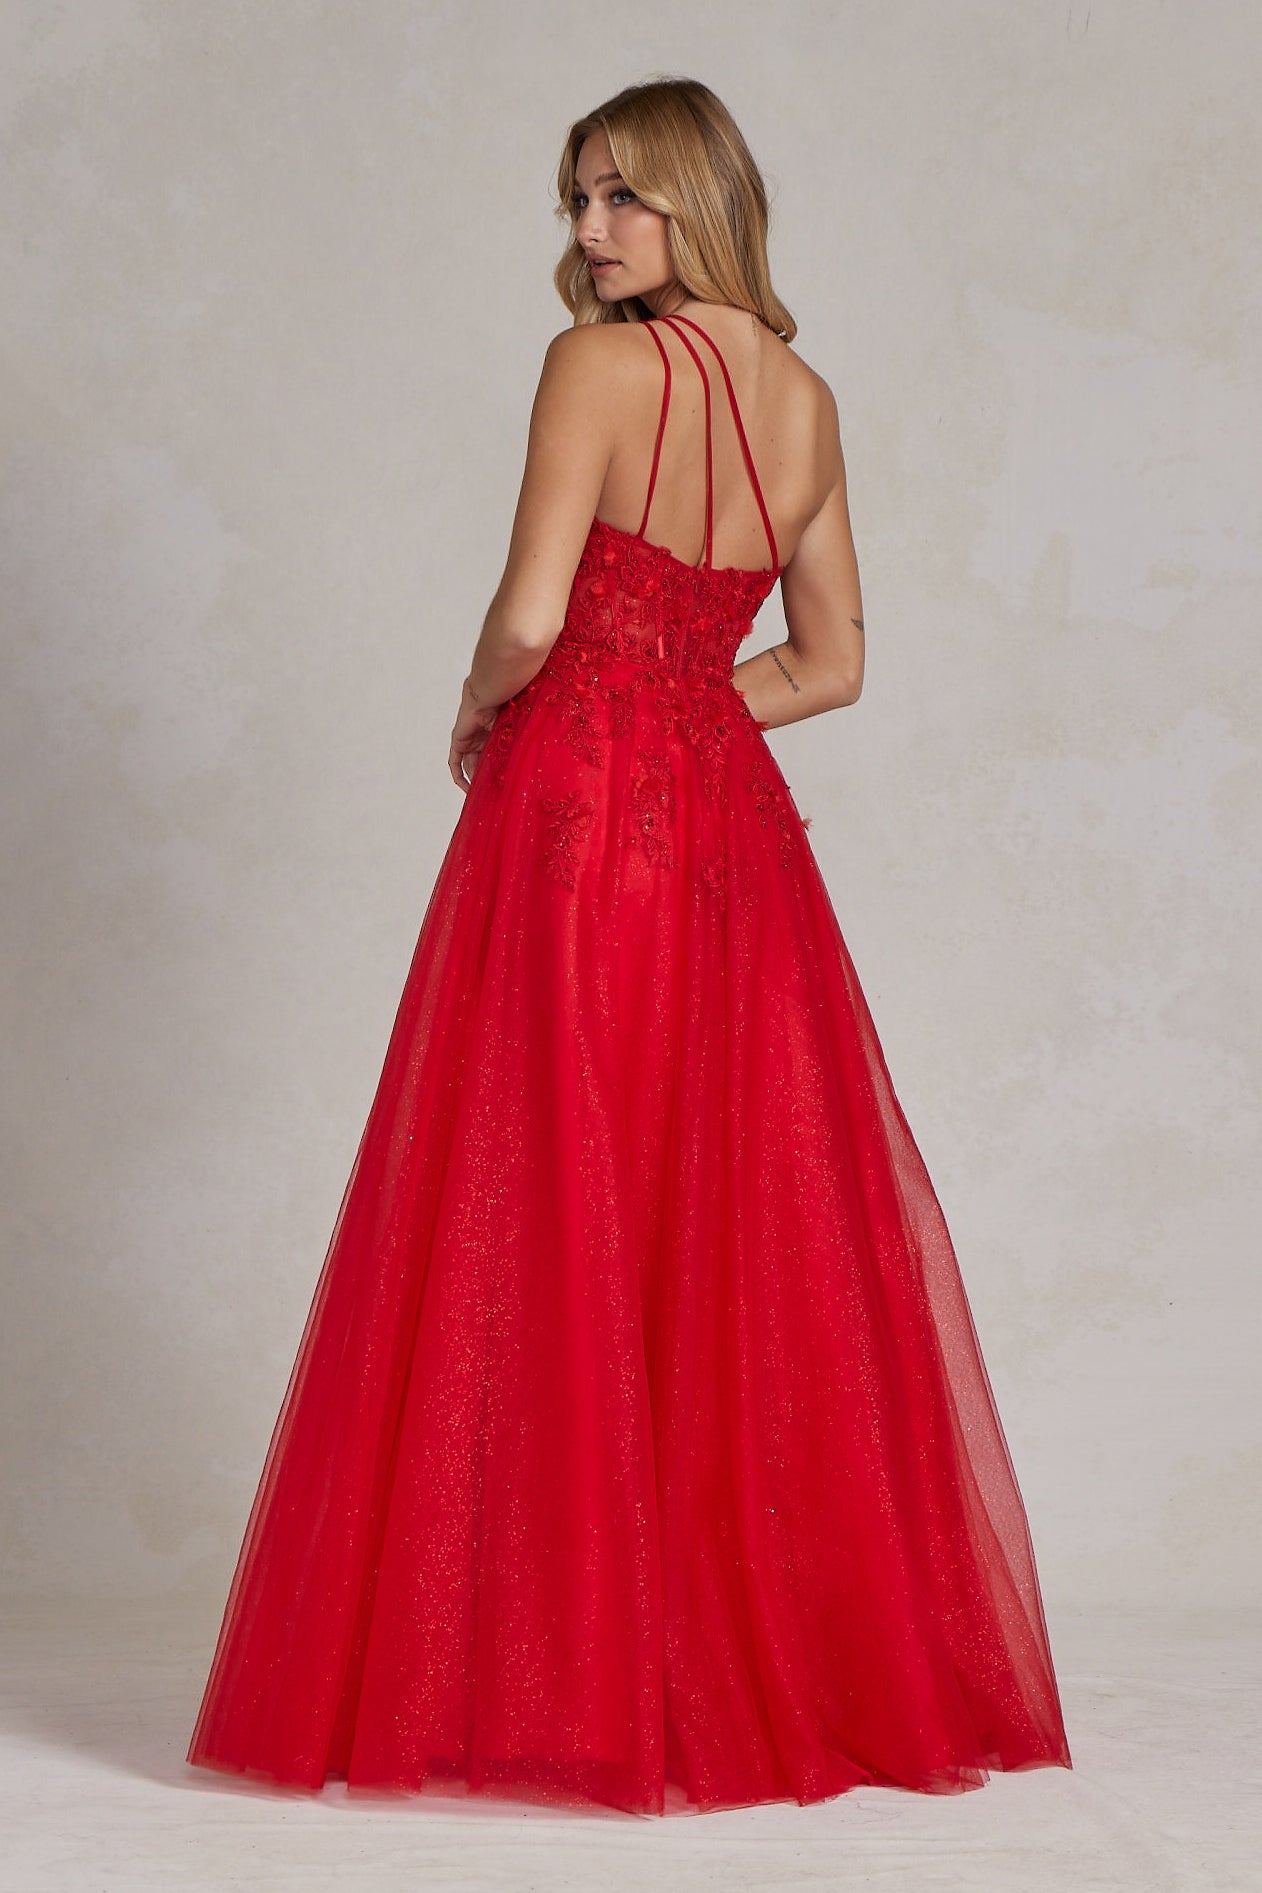 A-Line Embroidered Bodice Halter Open Back Long Prom Dress NXT1143-Prom Dress-smcfashion.com